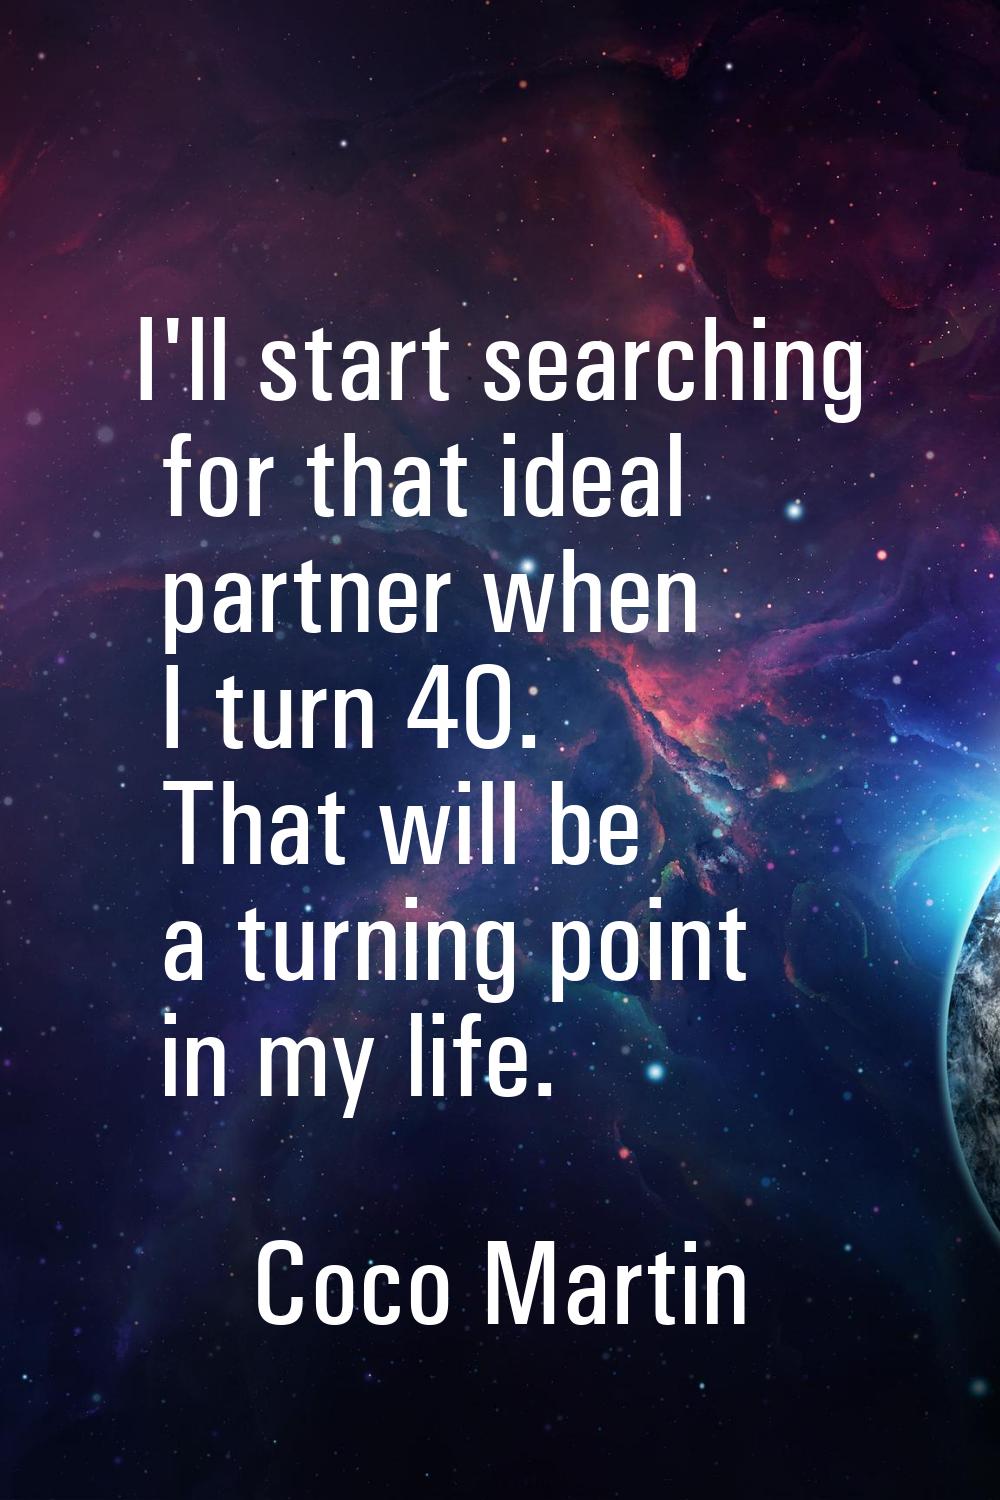 I'll start searching for that ideal partner when I turn 40. That will be a turning point in my life